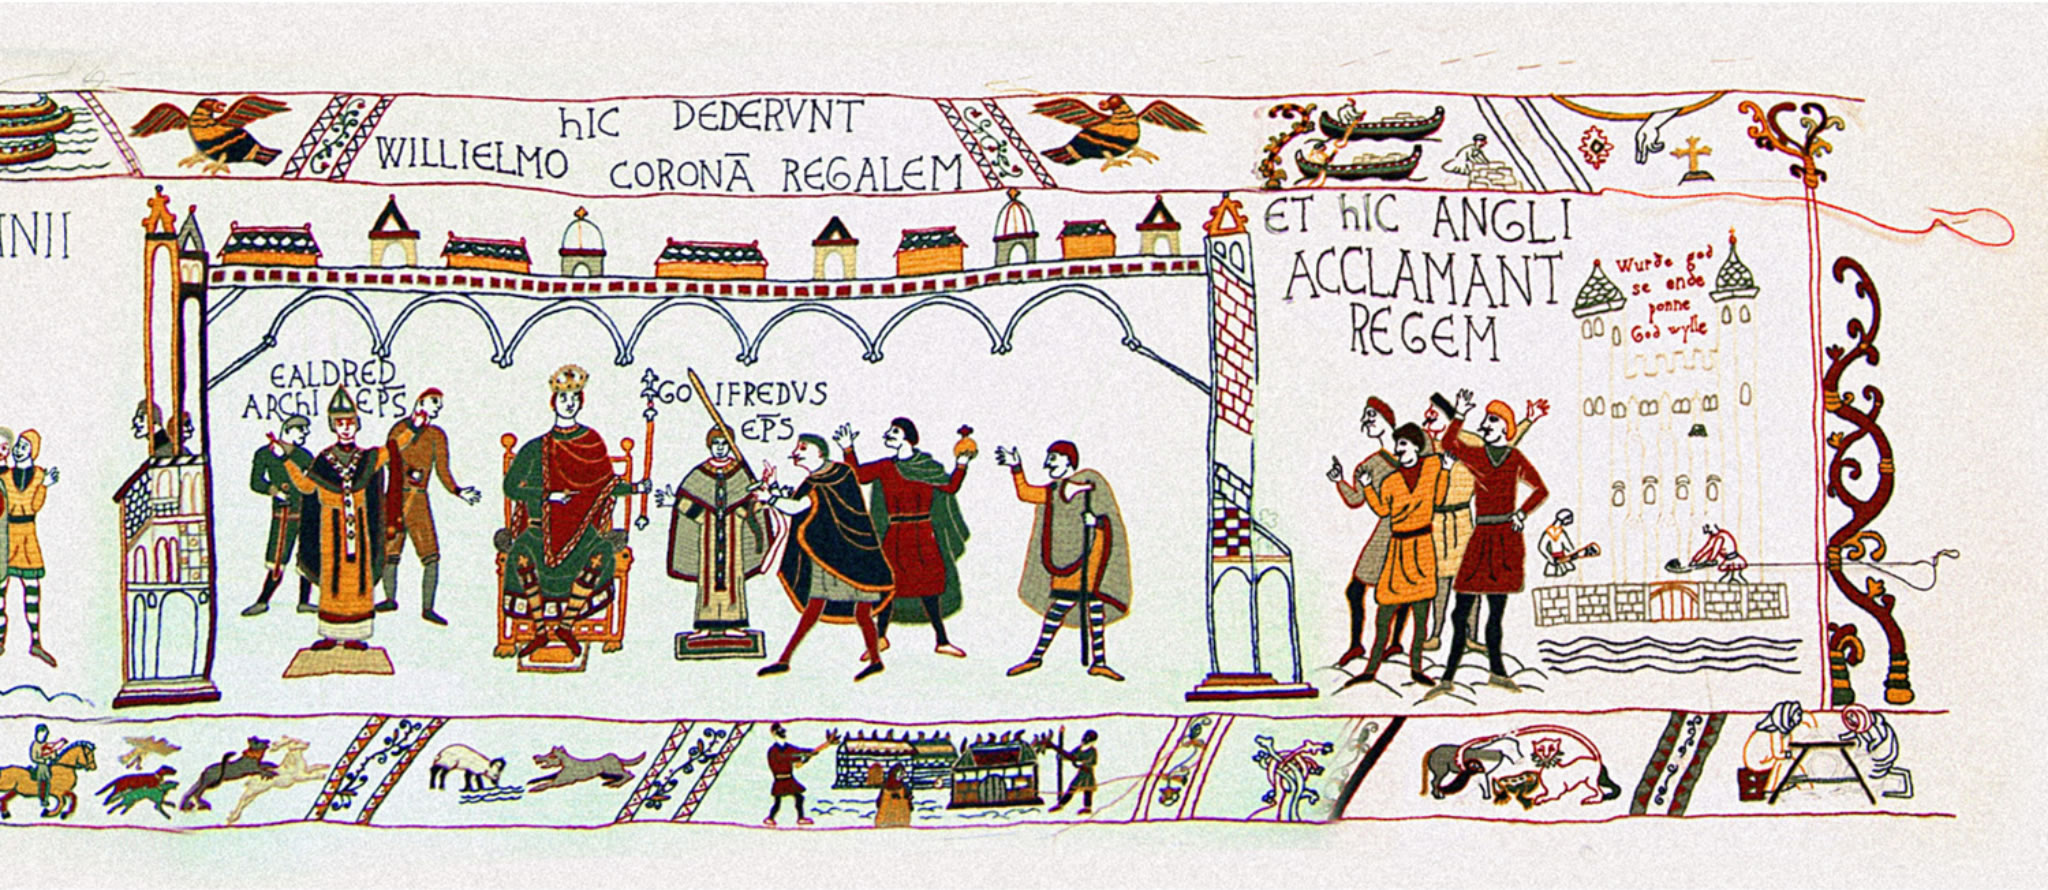 Bayeux Tapestry The designer of the Bayeux Tapestry also included little details that might be missed for Funny Tapestry for Ideas to Hang Funny Tapestry